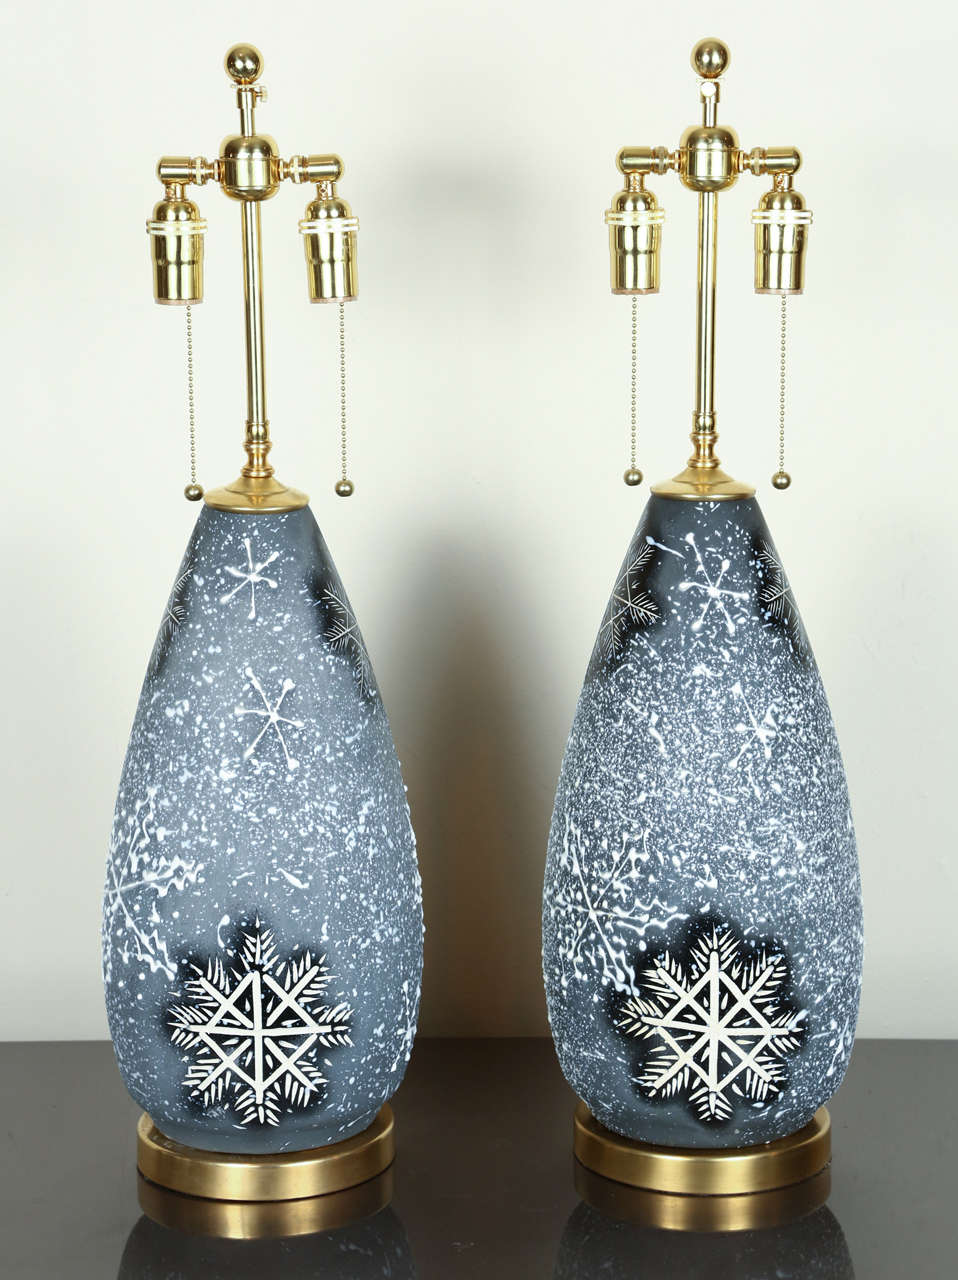 Pair of lovely ceramic lamps with a whimsical snowflake design.
The snowflake design is both incised and drip glazed on the surface and they are newly rewired with brass double clusters that take standard light bulbs.